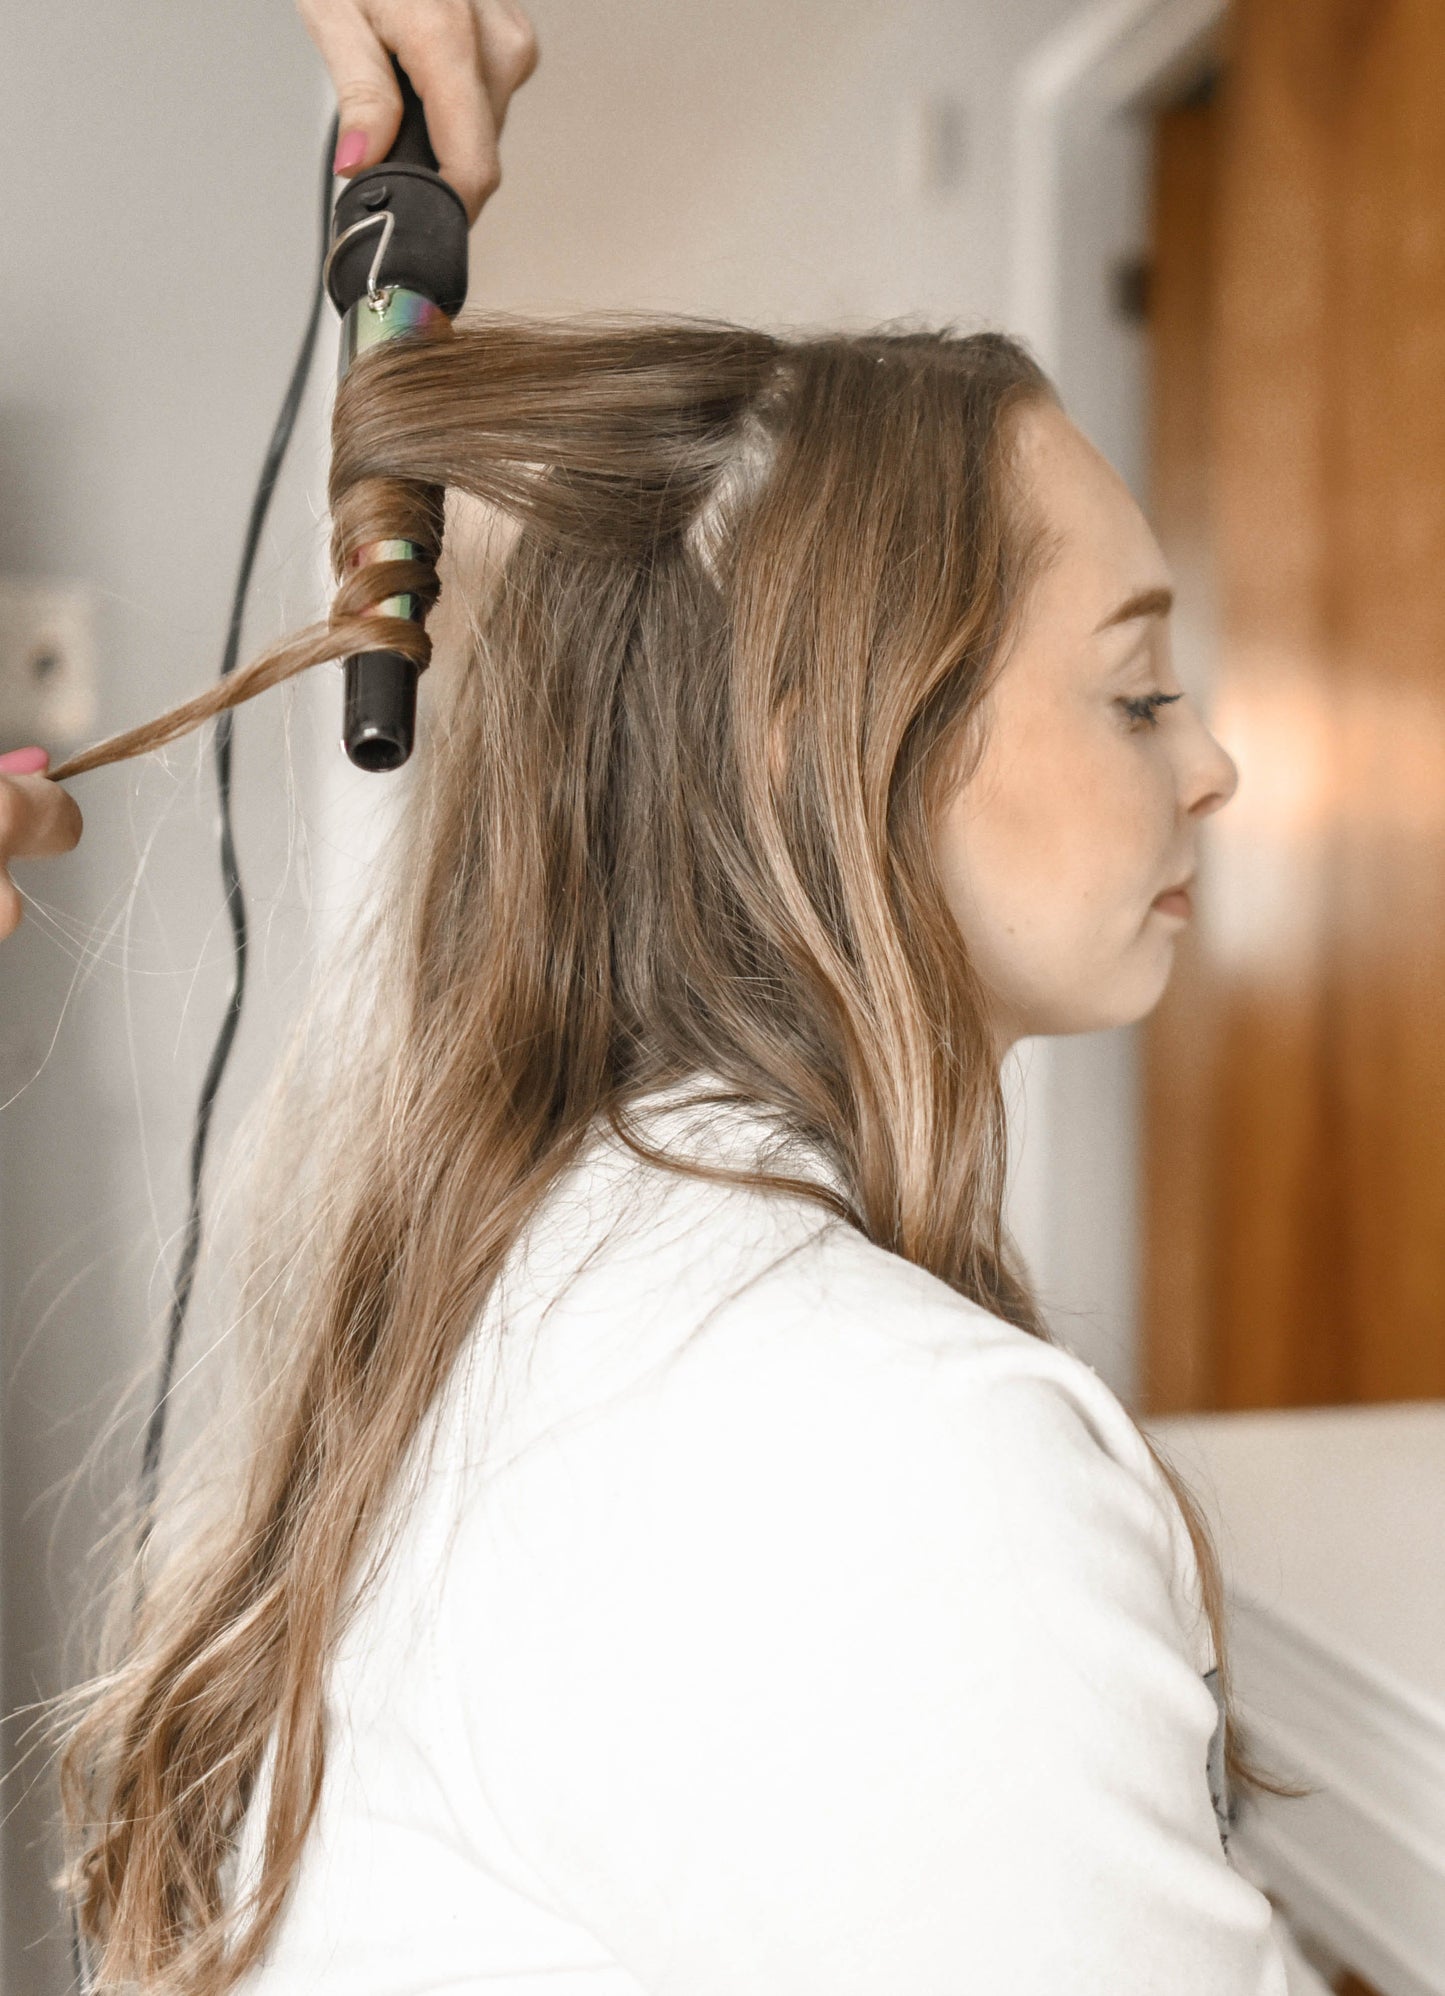 Opleiding Pro Hairstyling